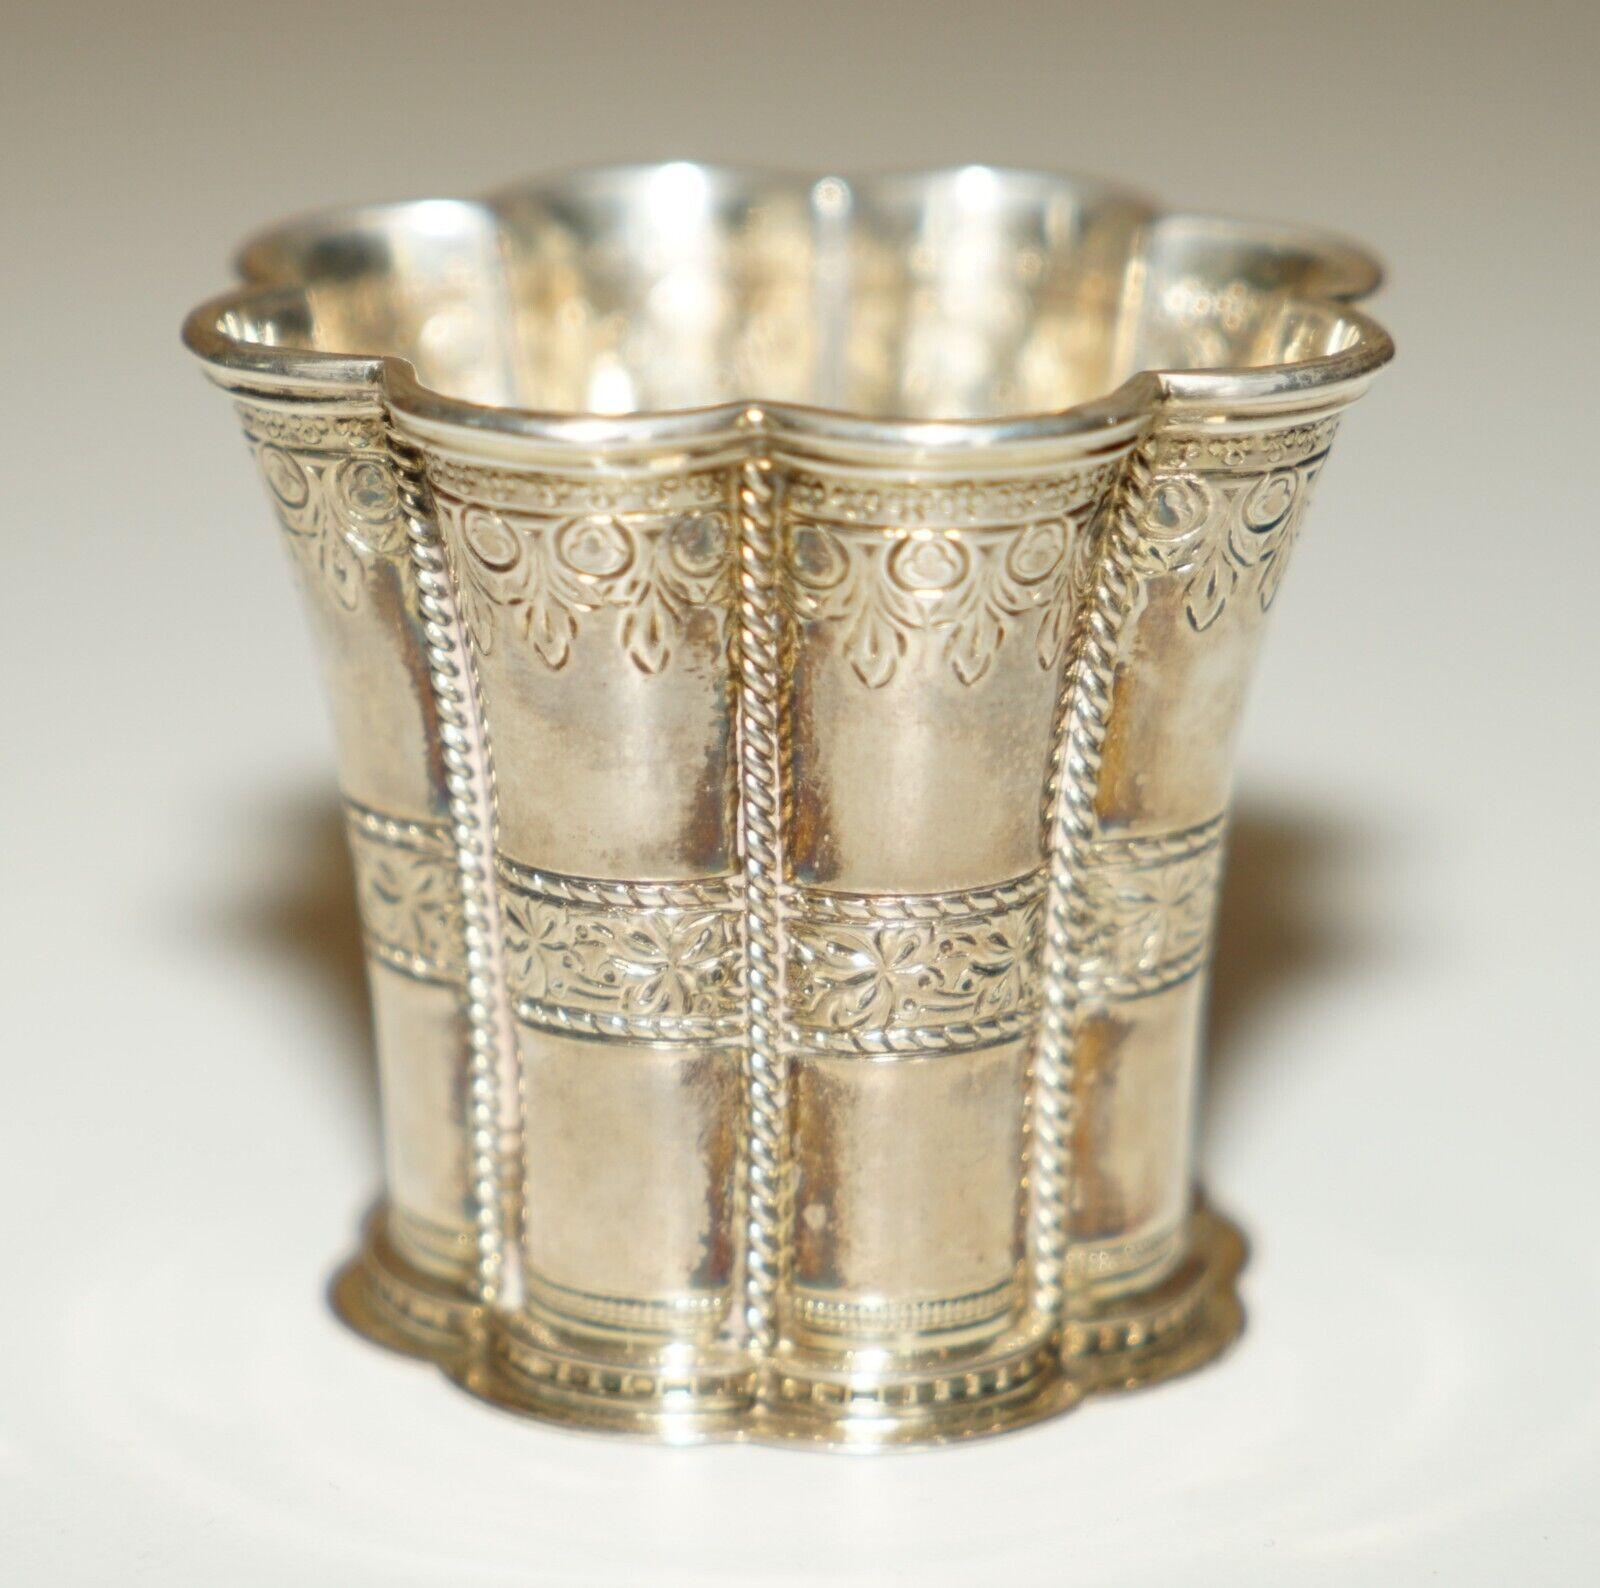 Royal House Antiques

Royal House Antiques is delighted to offer for this stunning period gold gilt Solid Sterling Silver 1967 dated Queen Margreth cup which has a gold gilt finish

I have another of these listed under my other items which is